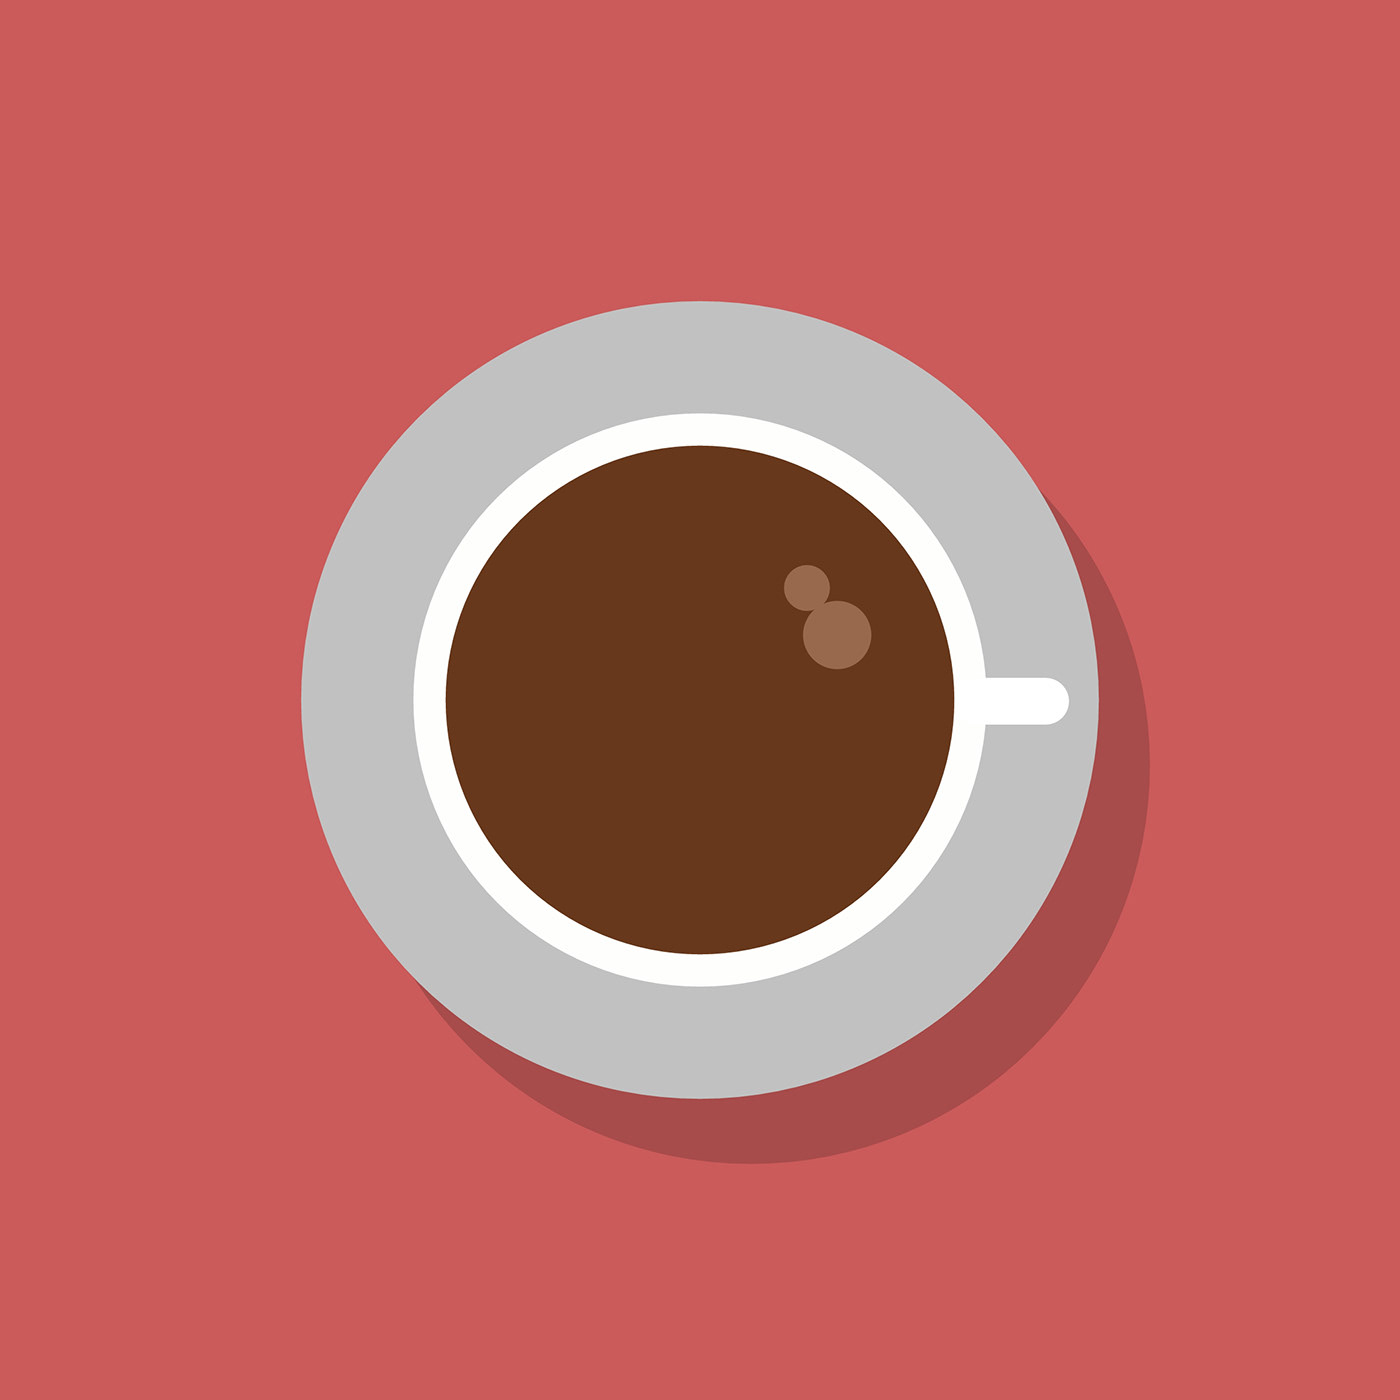 #coffee #infographic_des #mobile_infographic #photo_editor